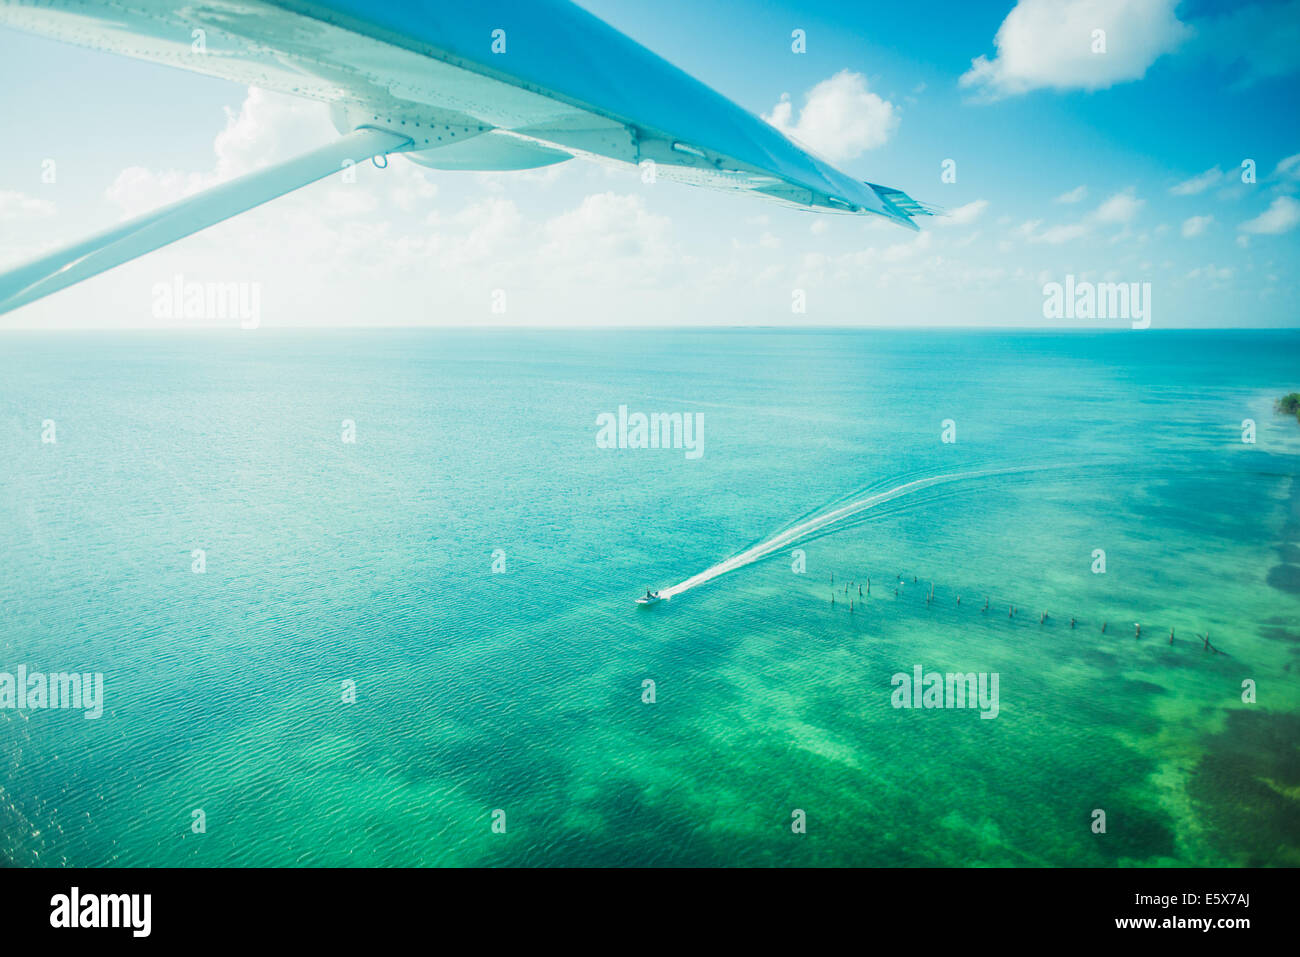 View of ocean from plane, San Pedro, Belize Stock Photo